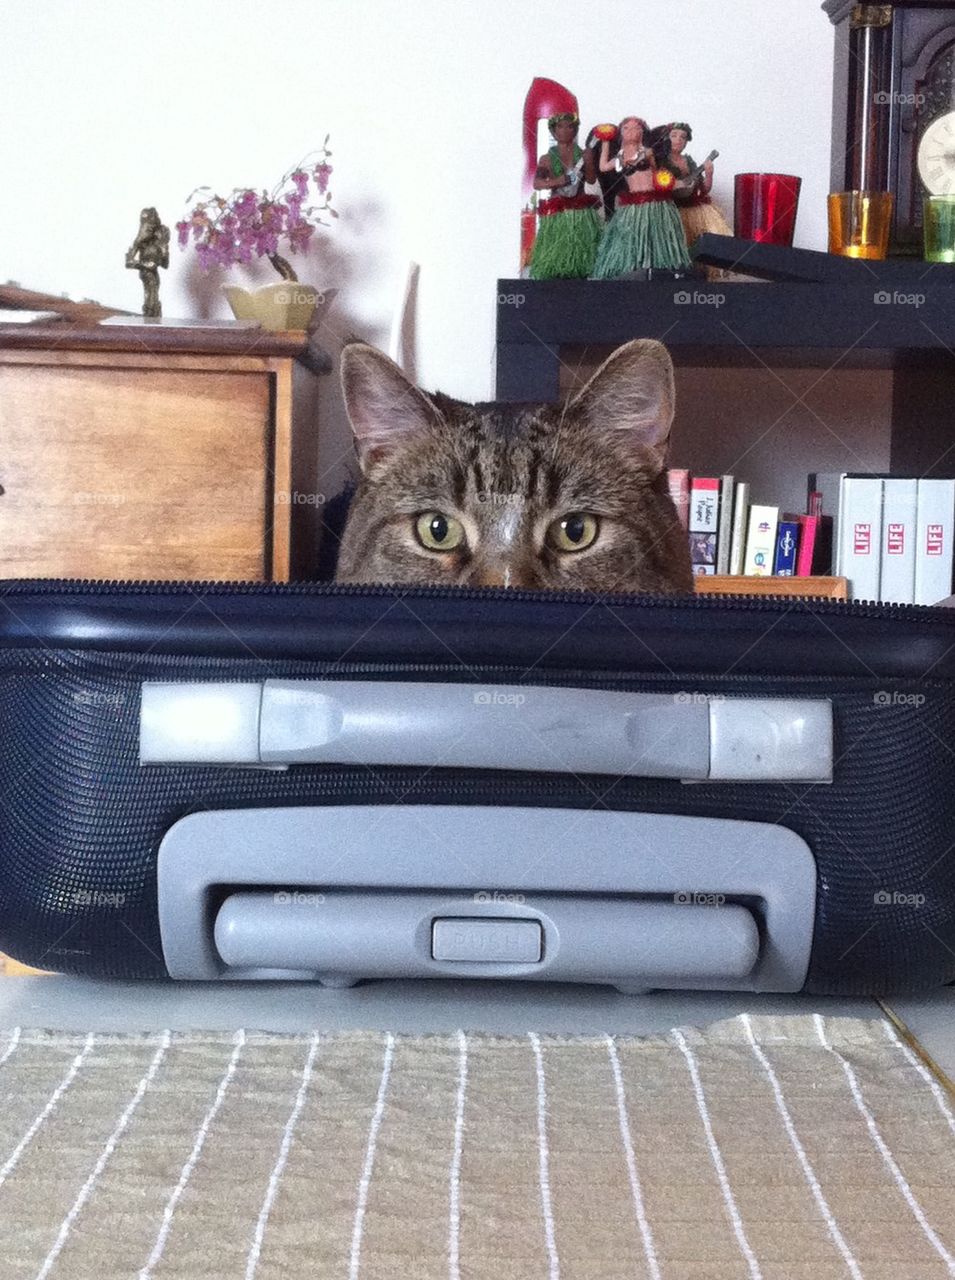 Joey in a suitcase